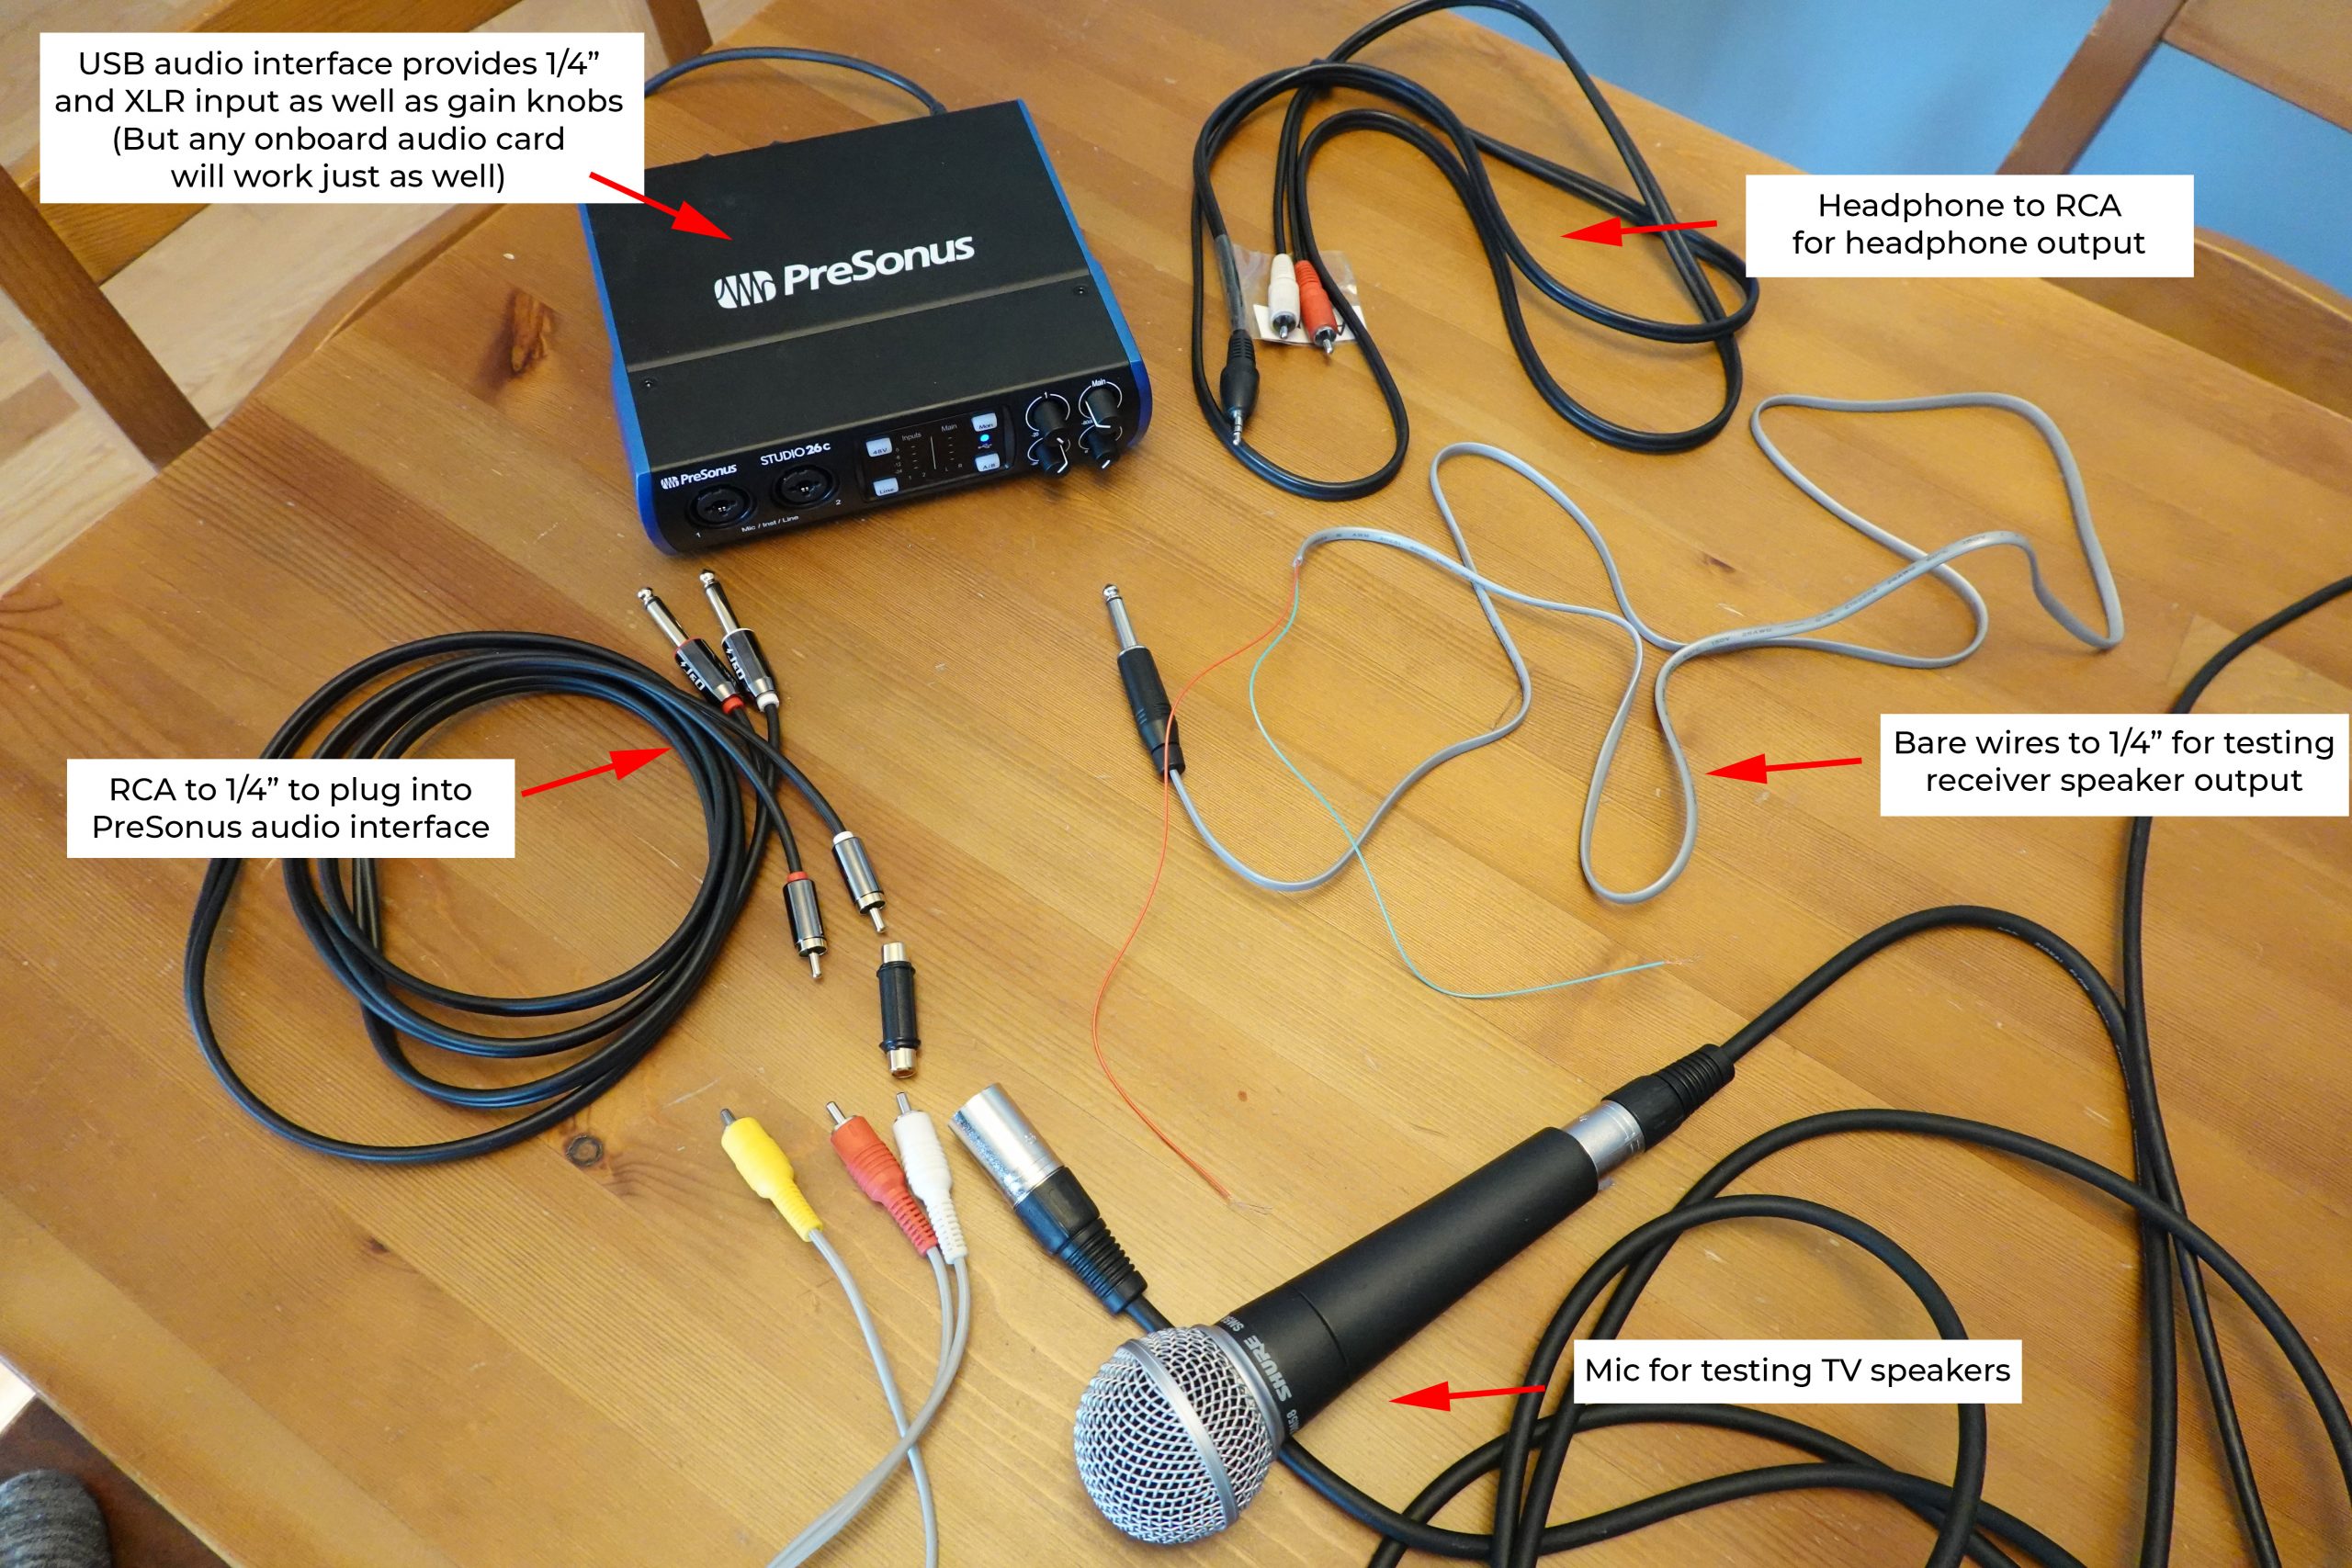 Various cables that can be useful when measuring audio latency